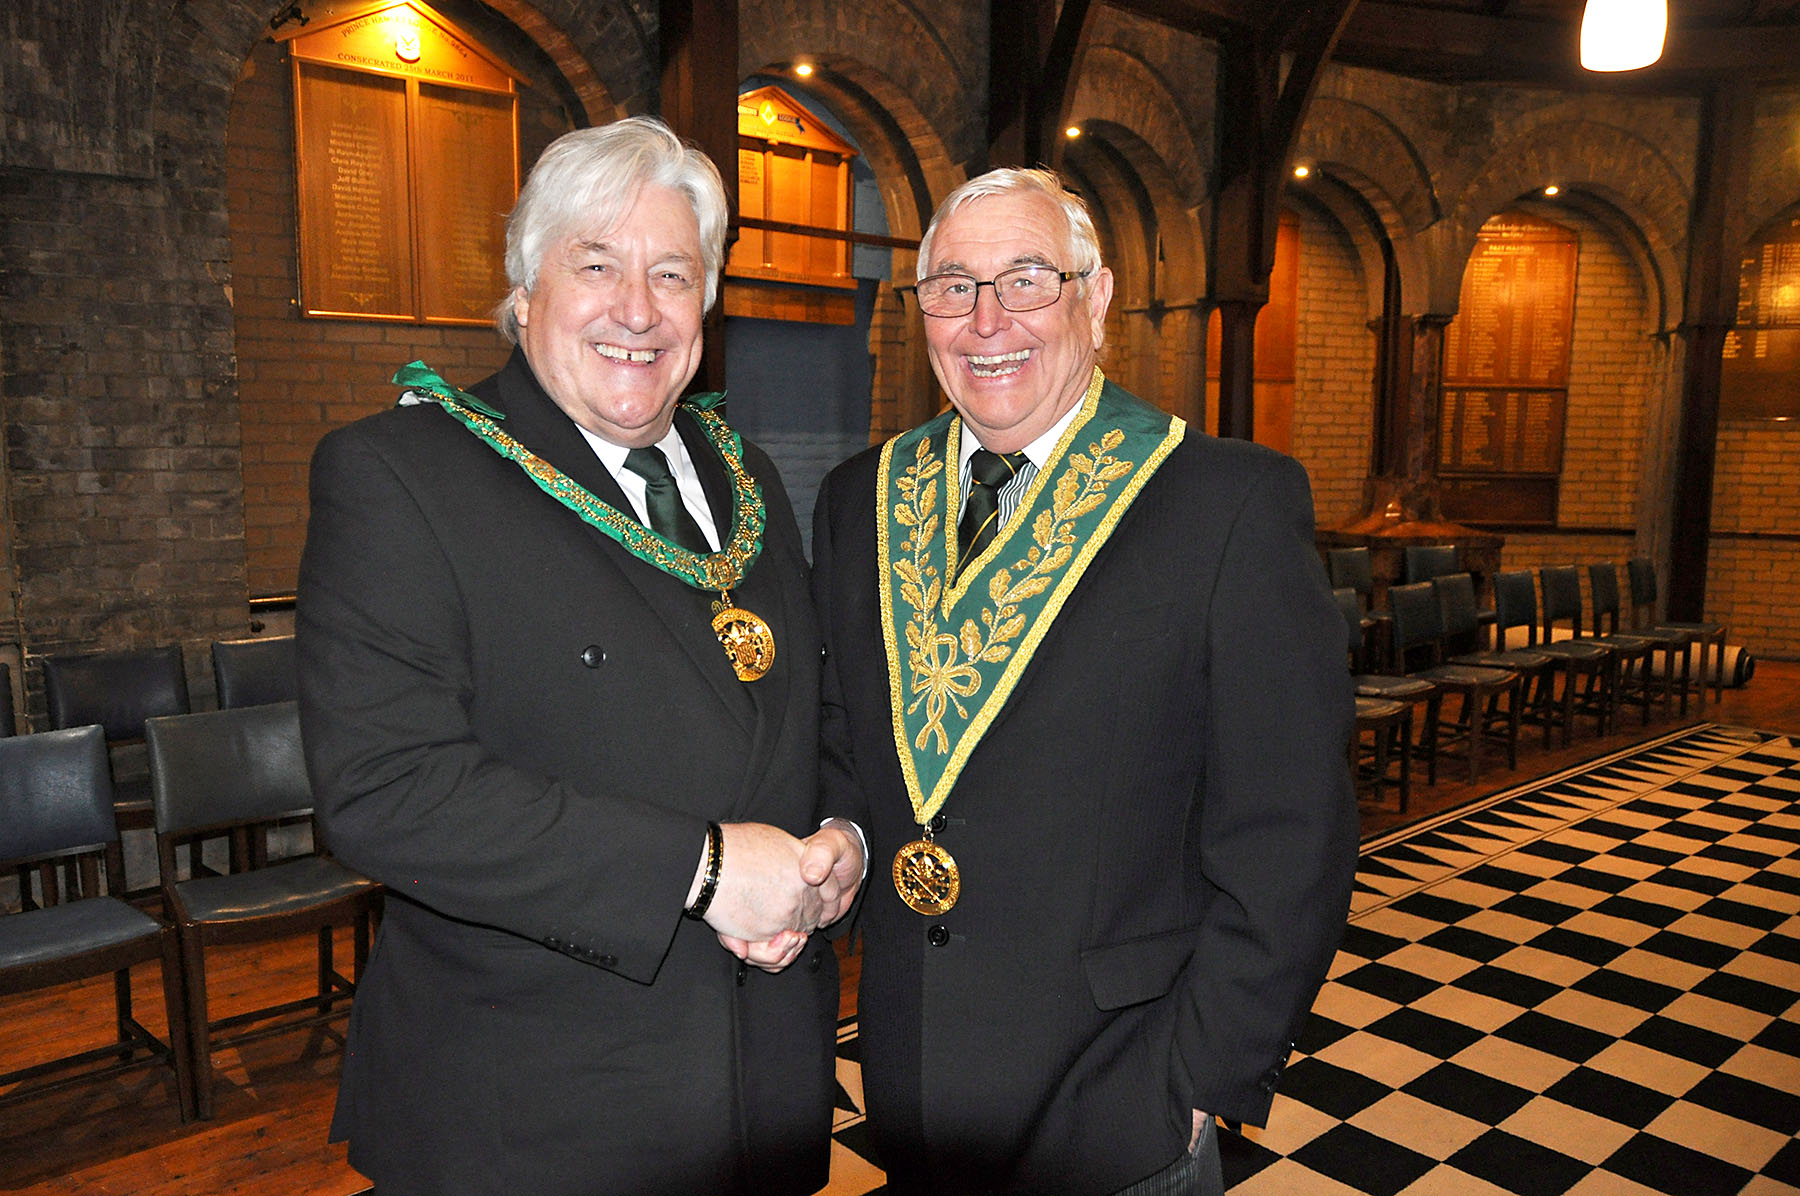 W.Bro. Geoff Whale with the D.G.P. for Surrey R.W.Bro. John French